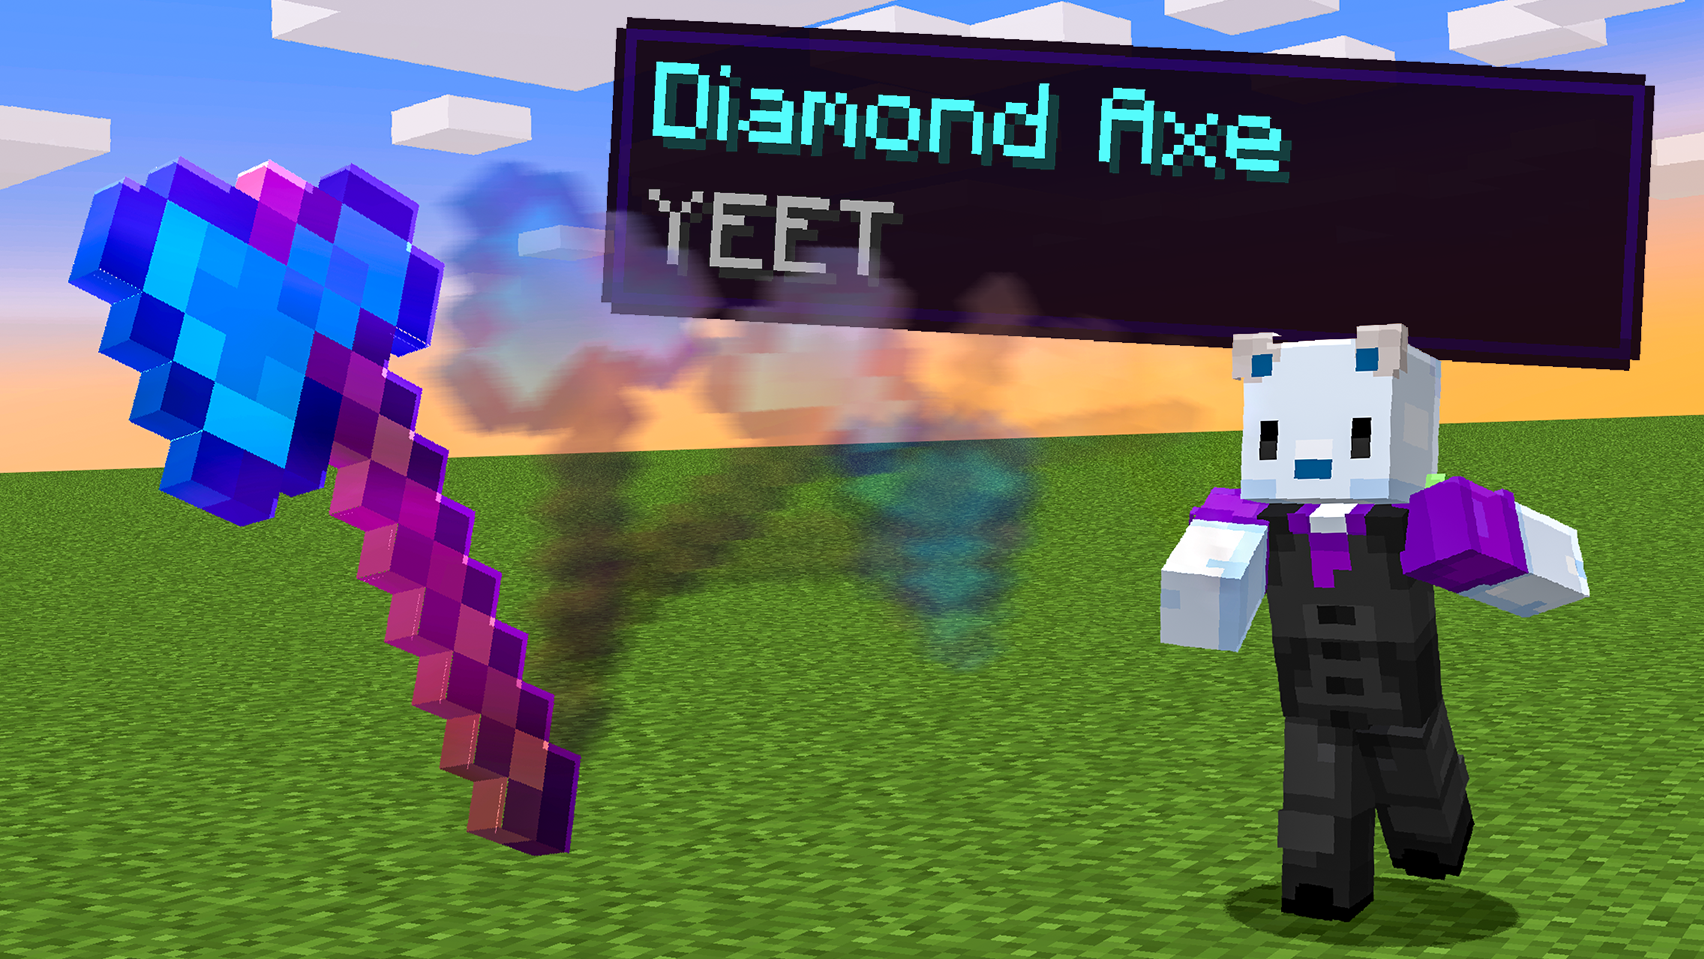 Yeet any item you want with this enchantment!